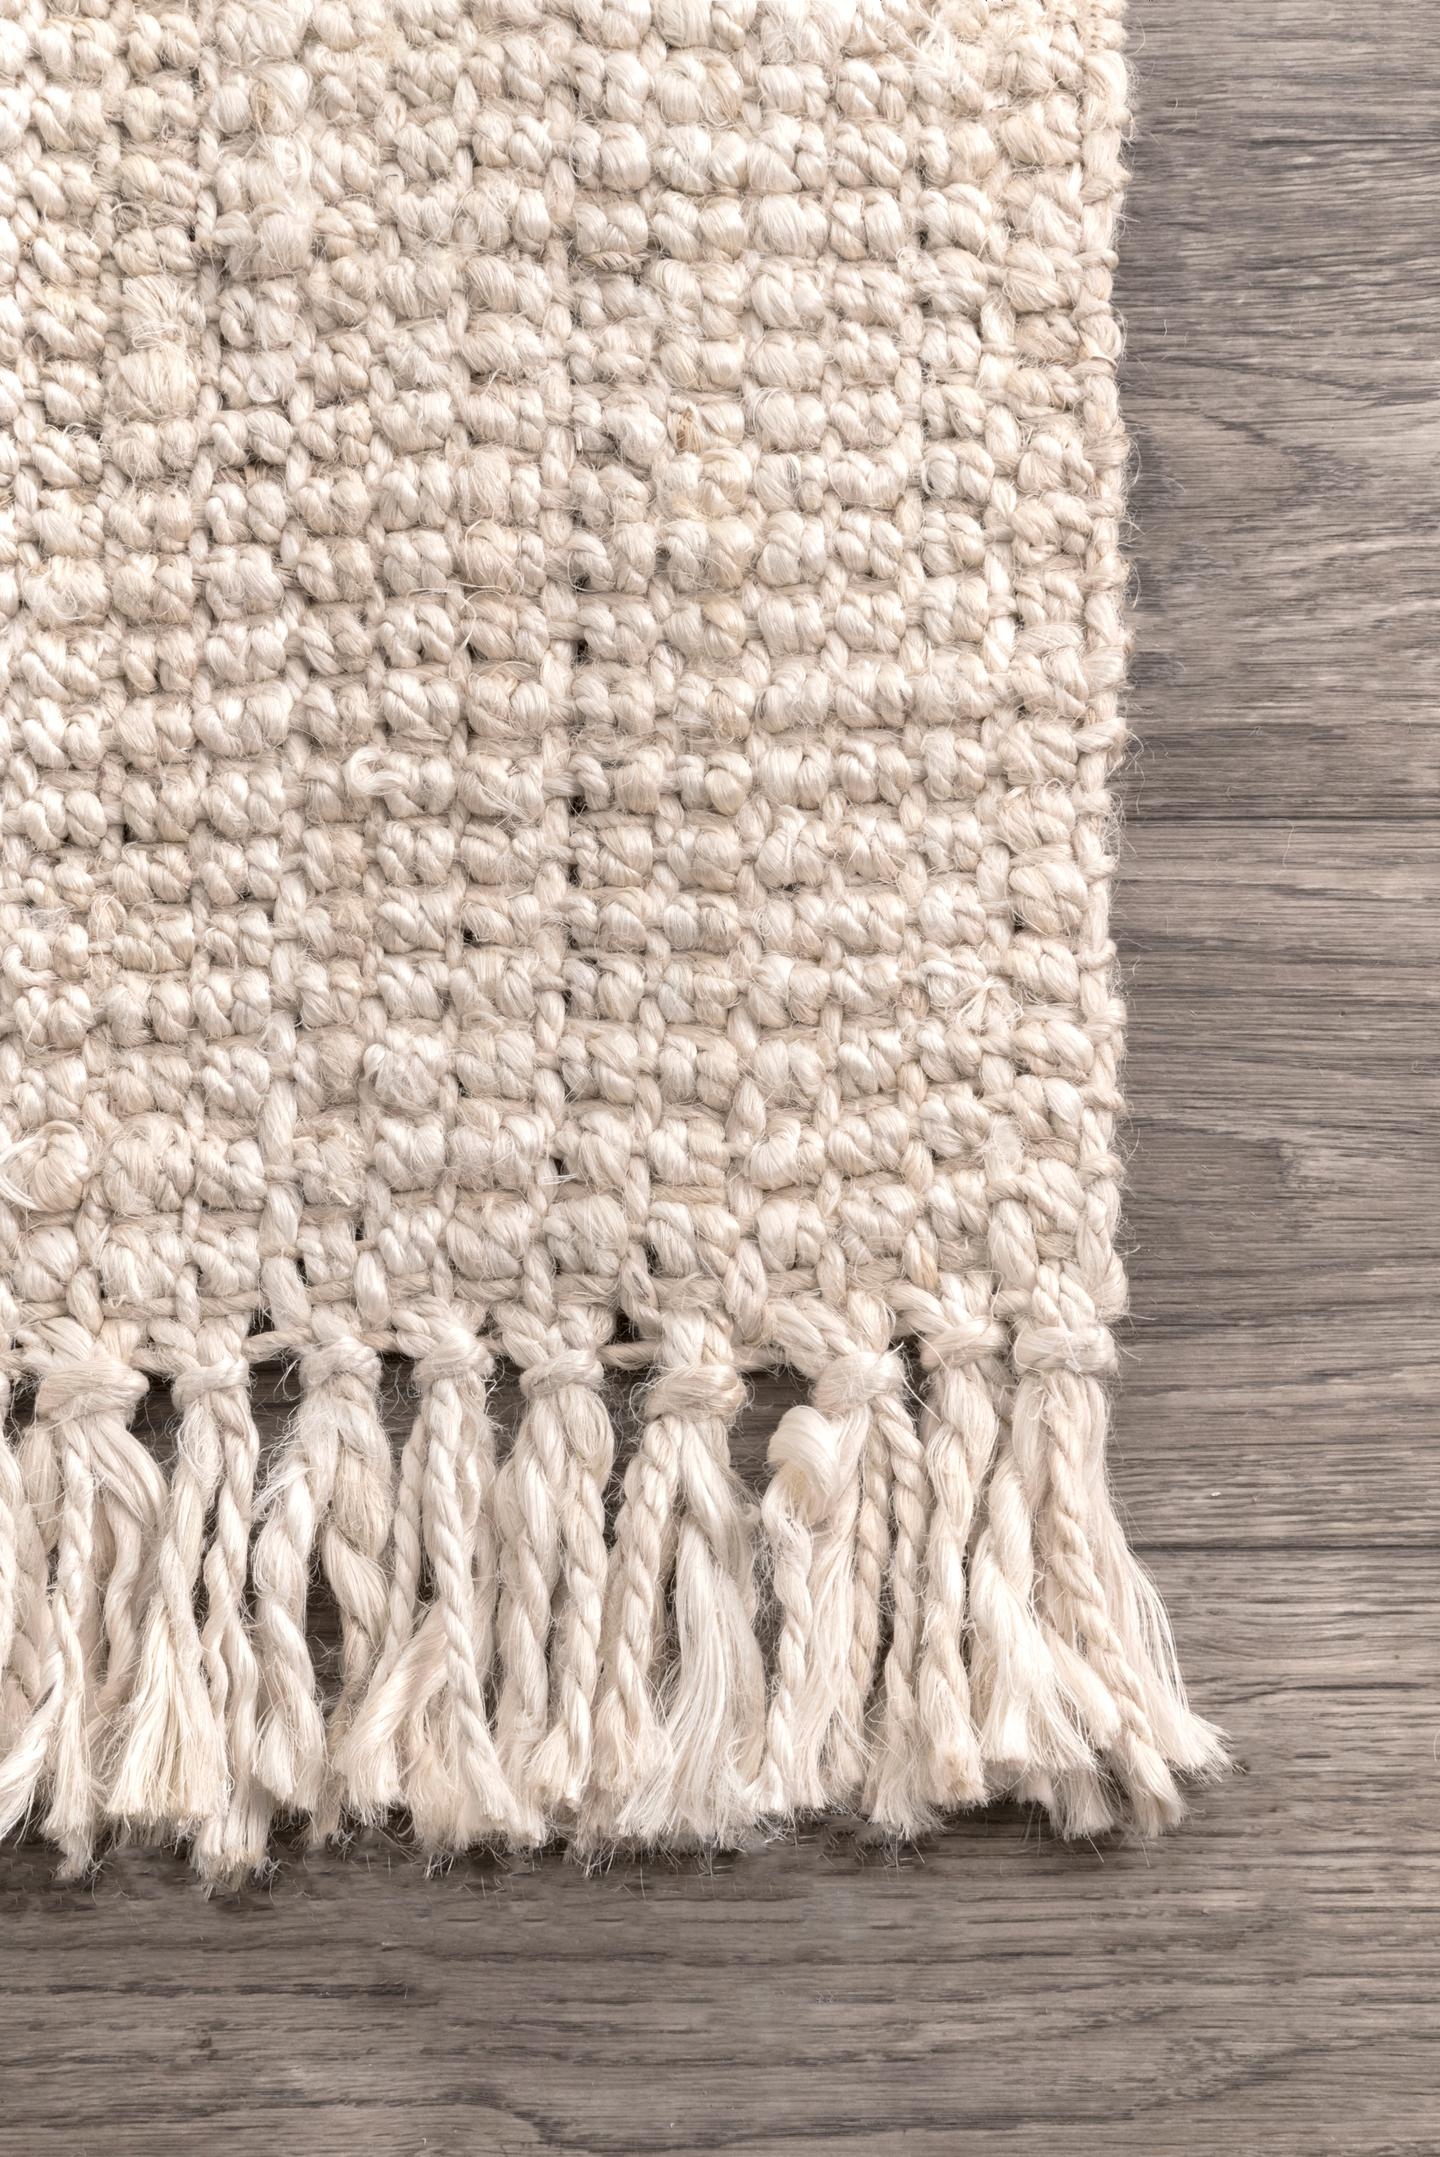 Hand Woven Chunky Loop Jute Area Rug, 9'6" x 11'6", Off White - Image 1